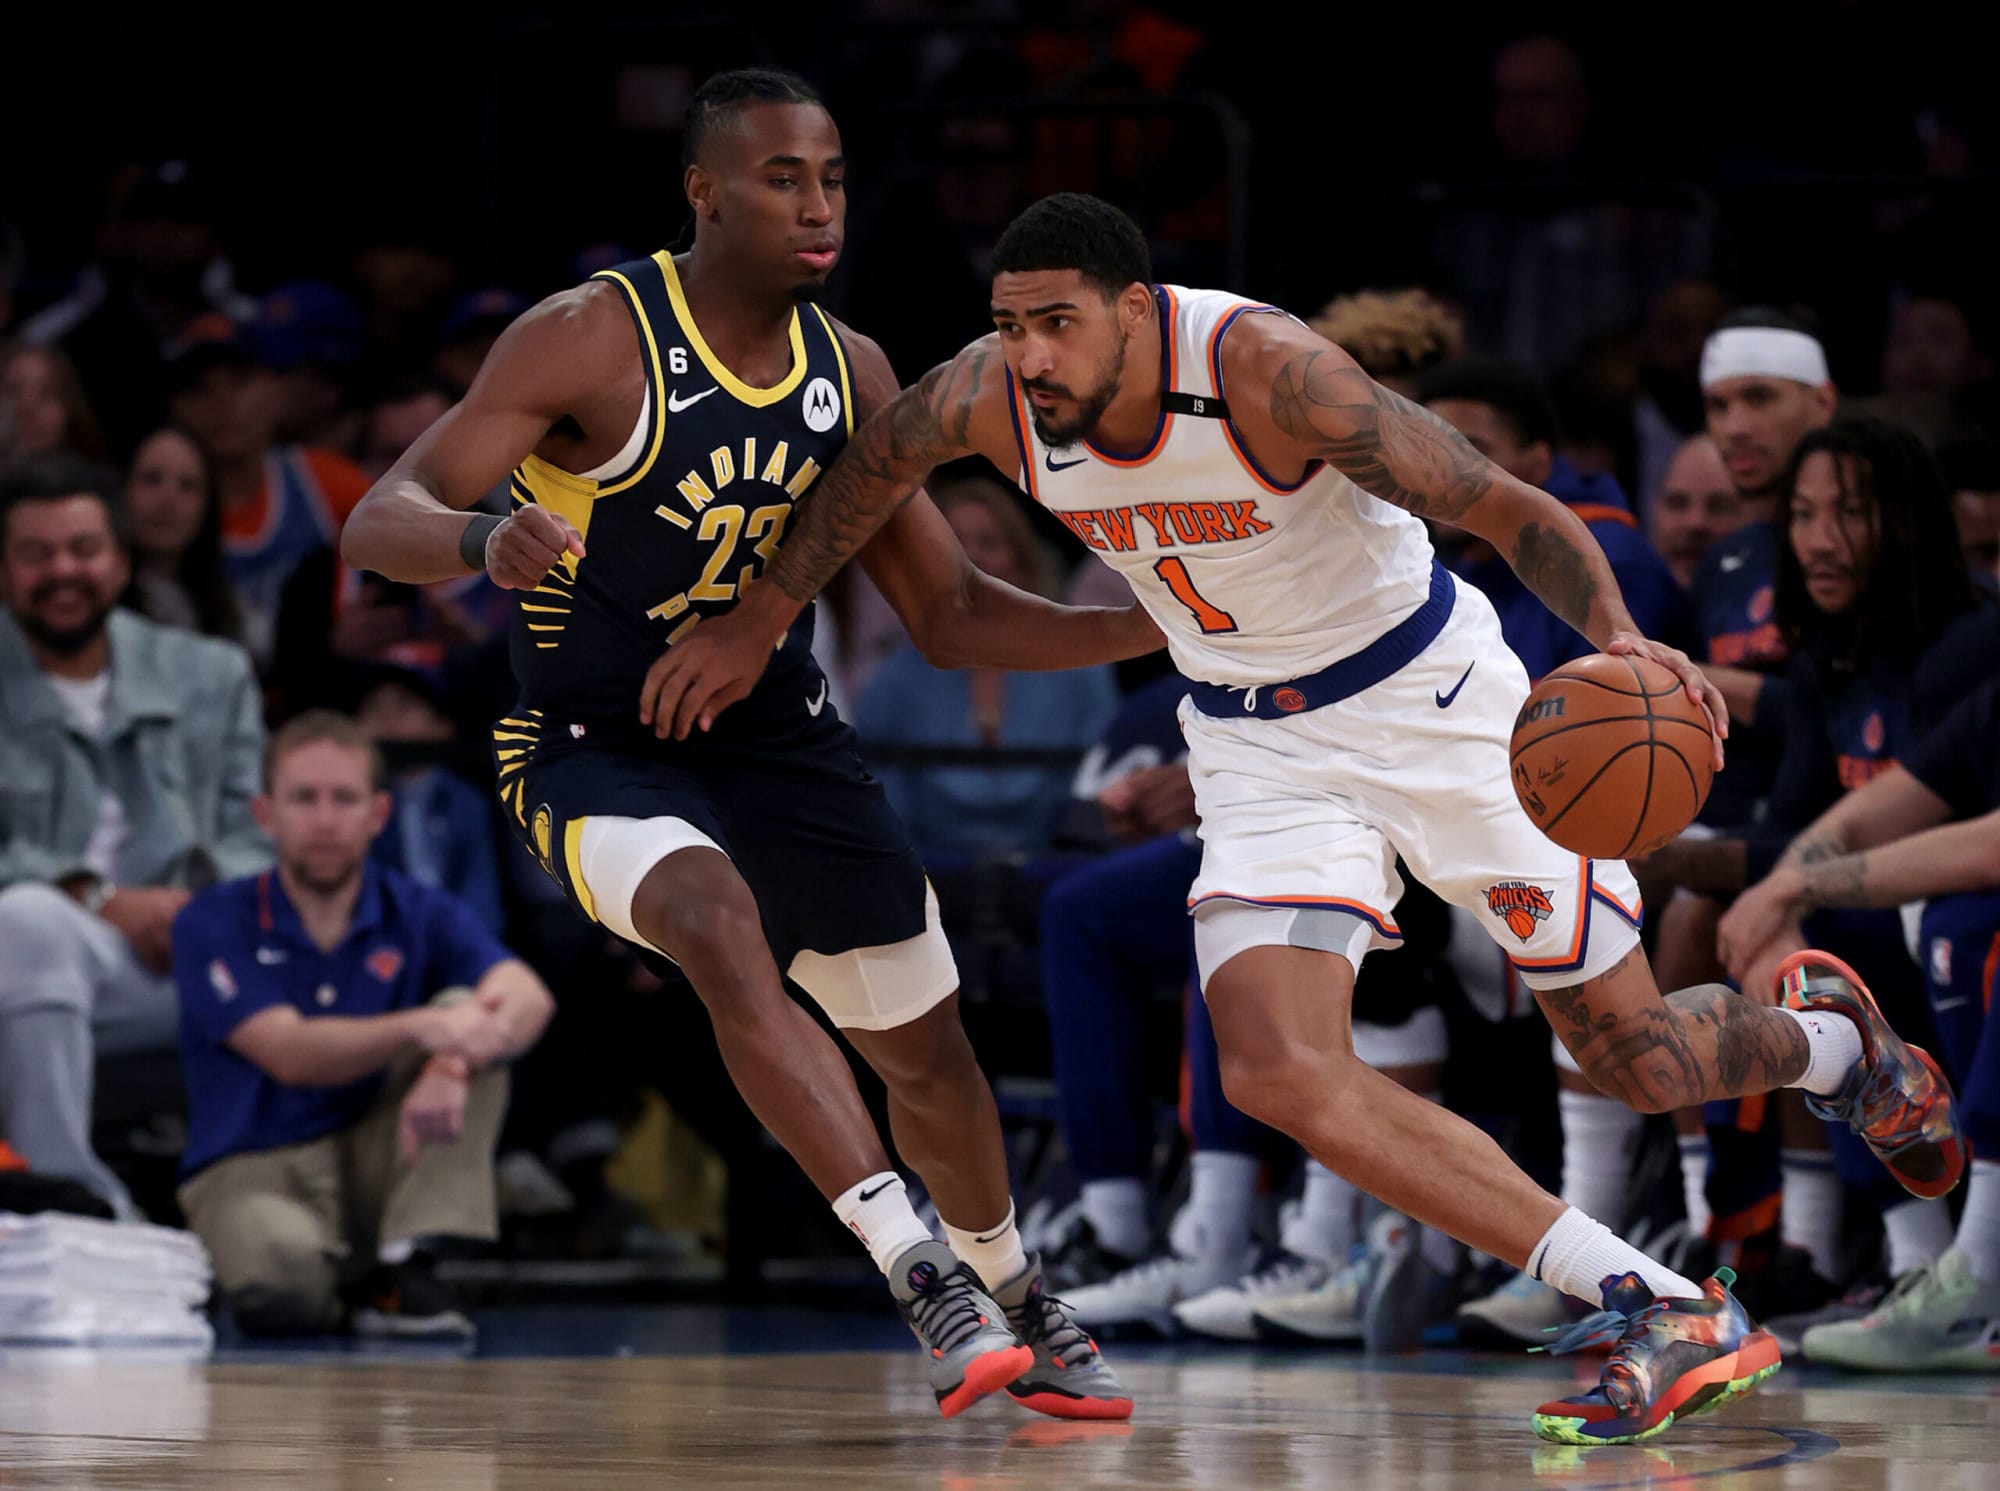 Proposed Obi Toppin trade would give Knicks 2023 NBA Draft firstround pick